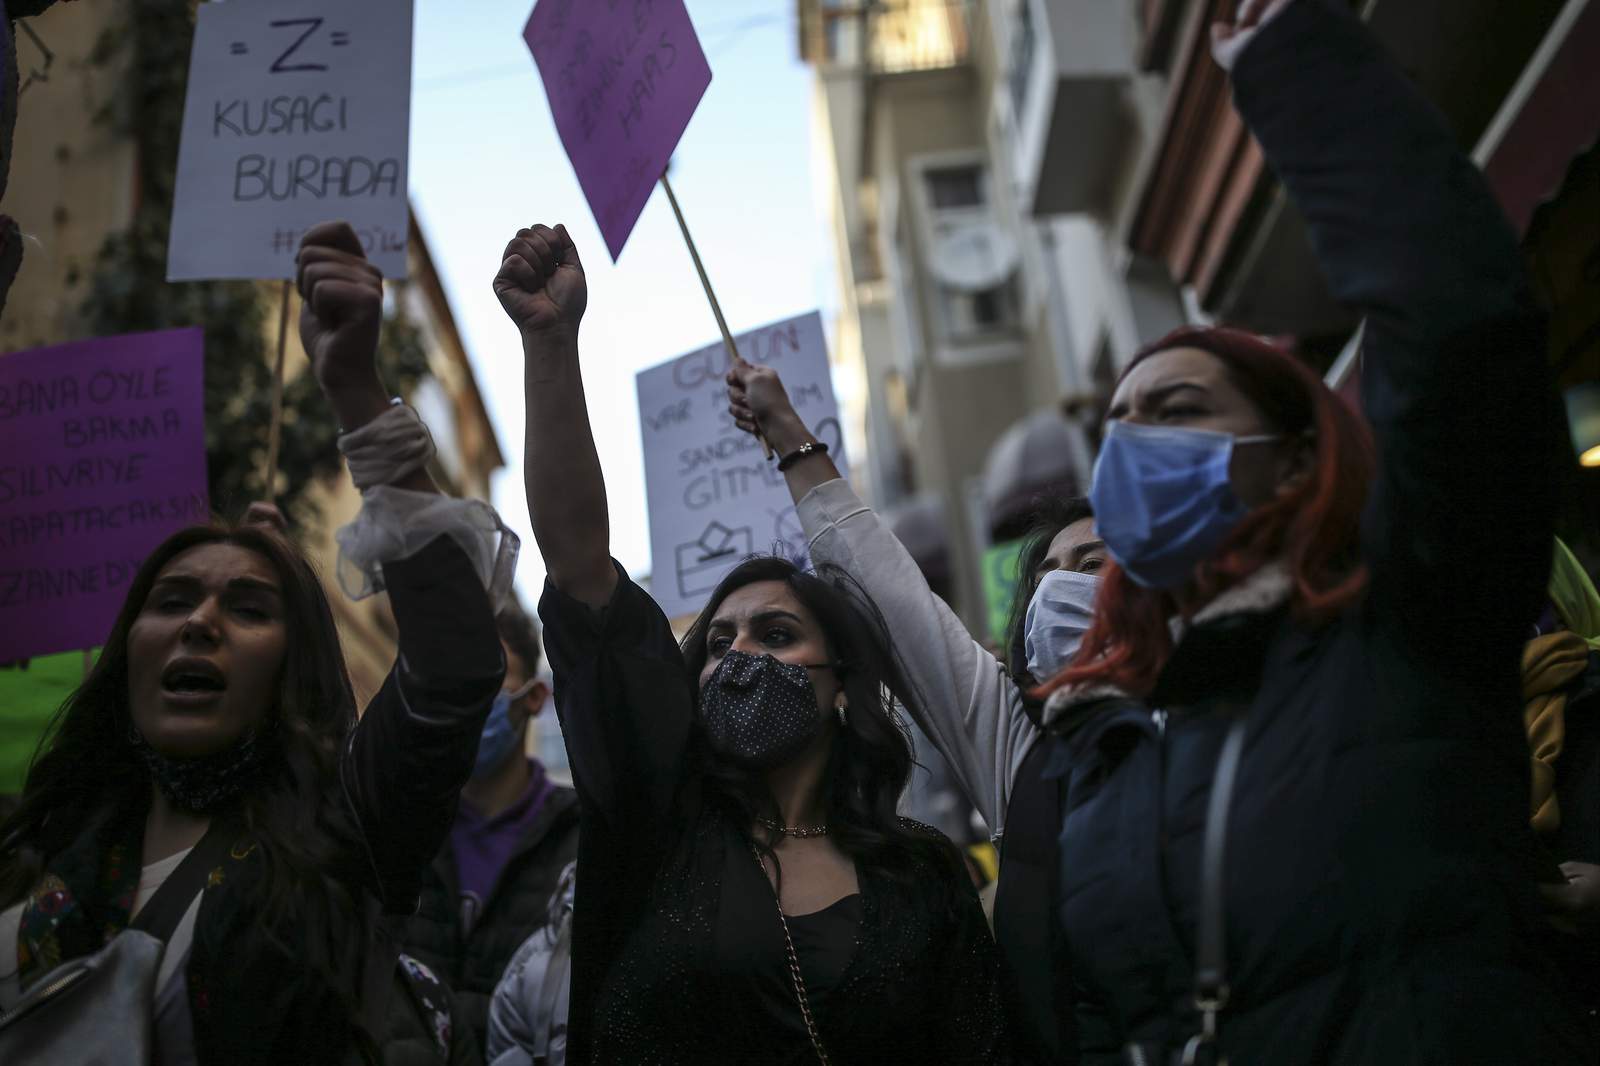 Protesters urge end to violence against women in Turkey